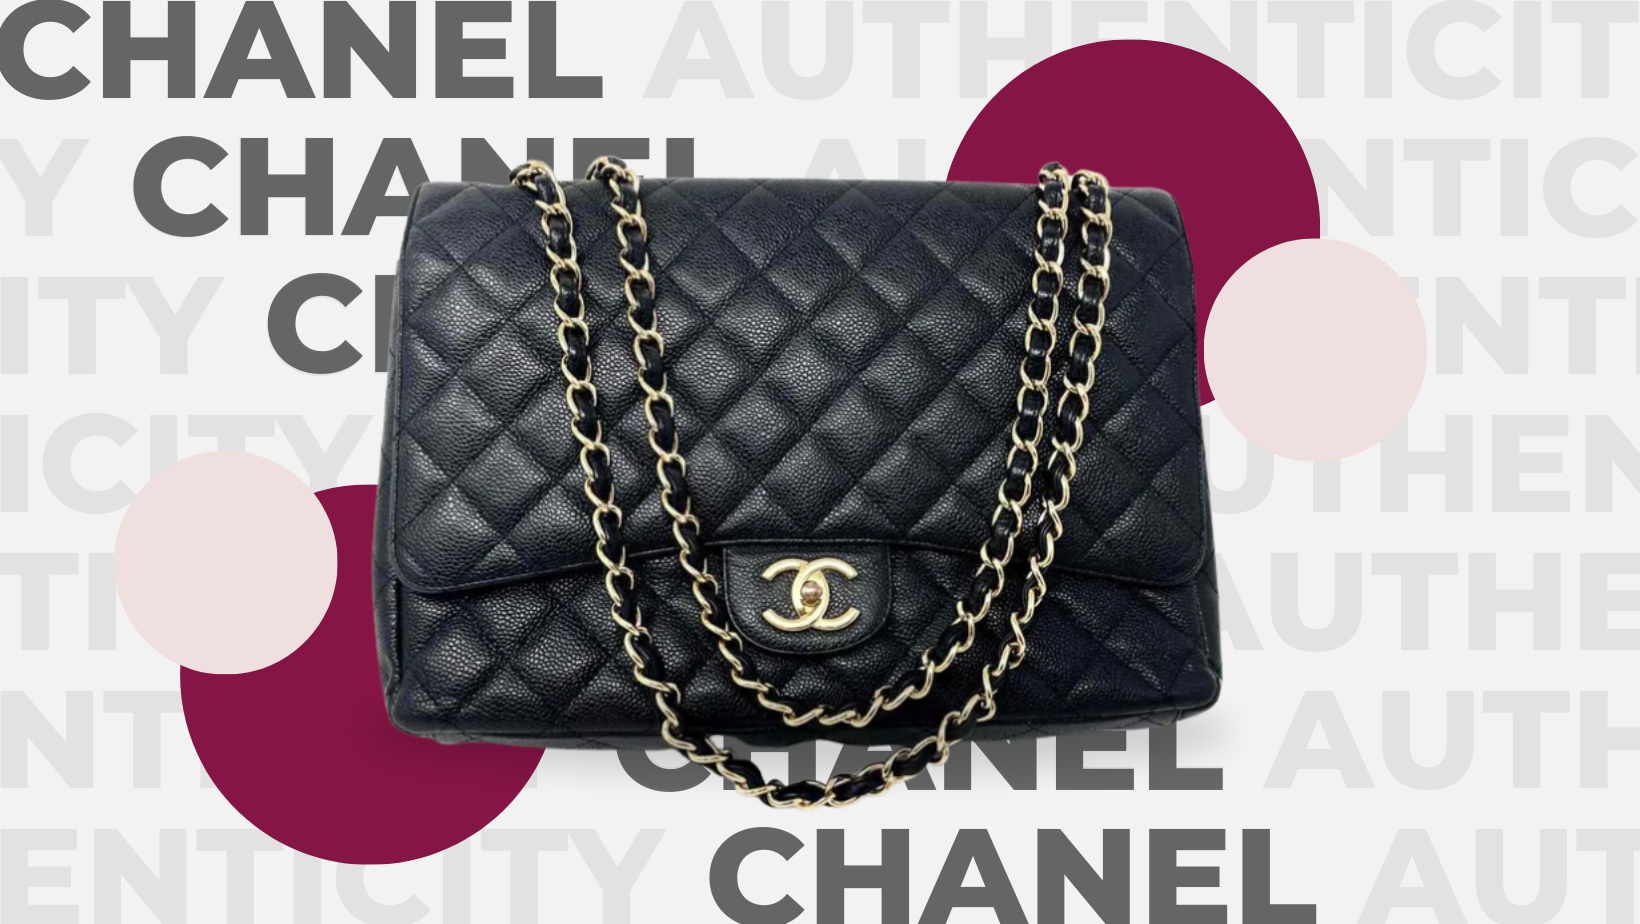 chanel red bag outfit